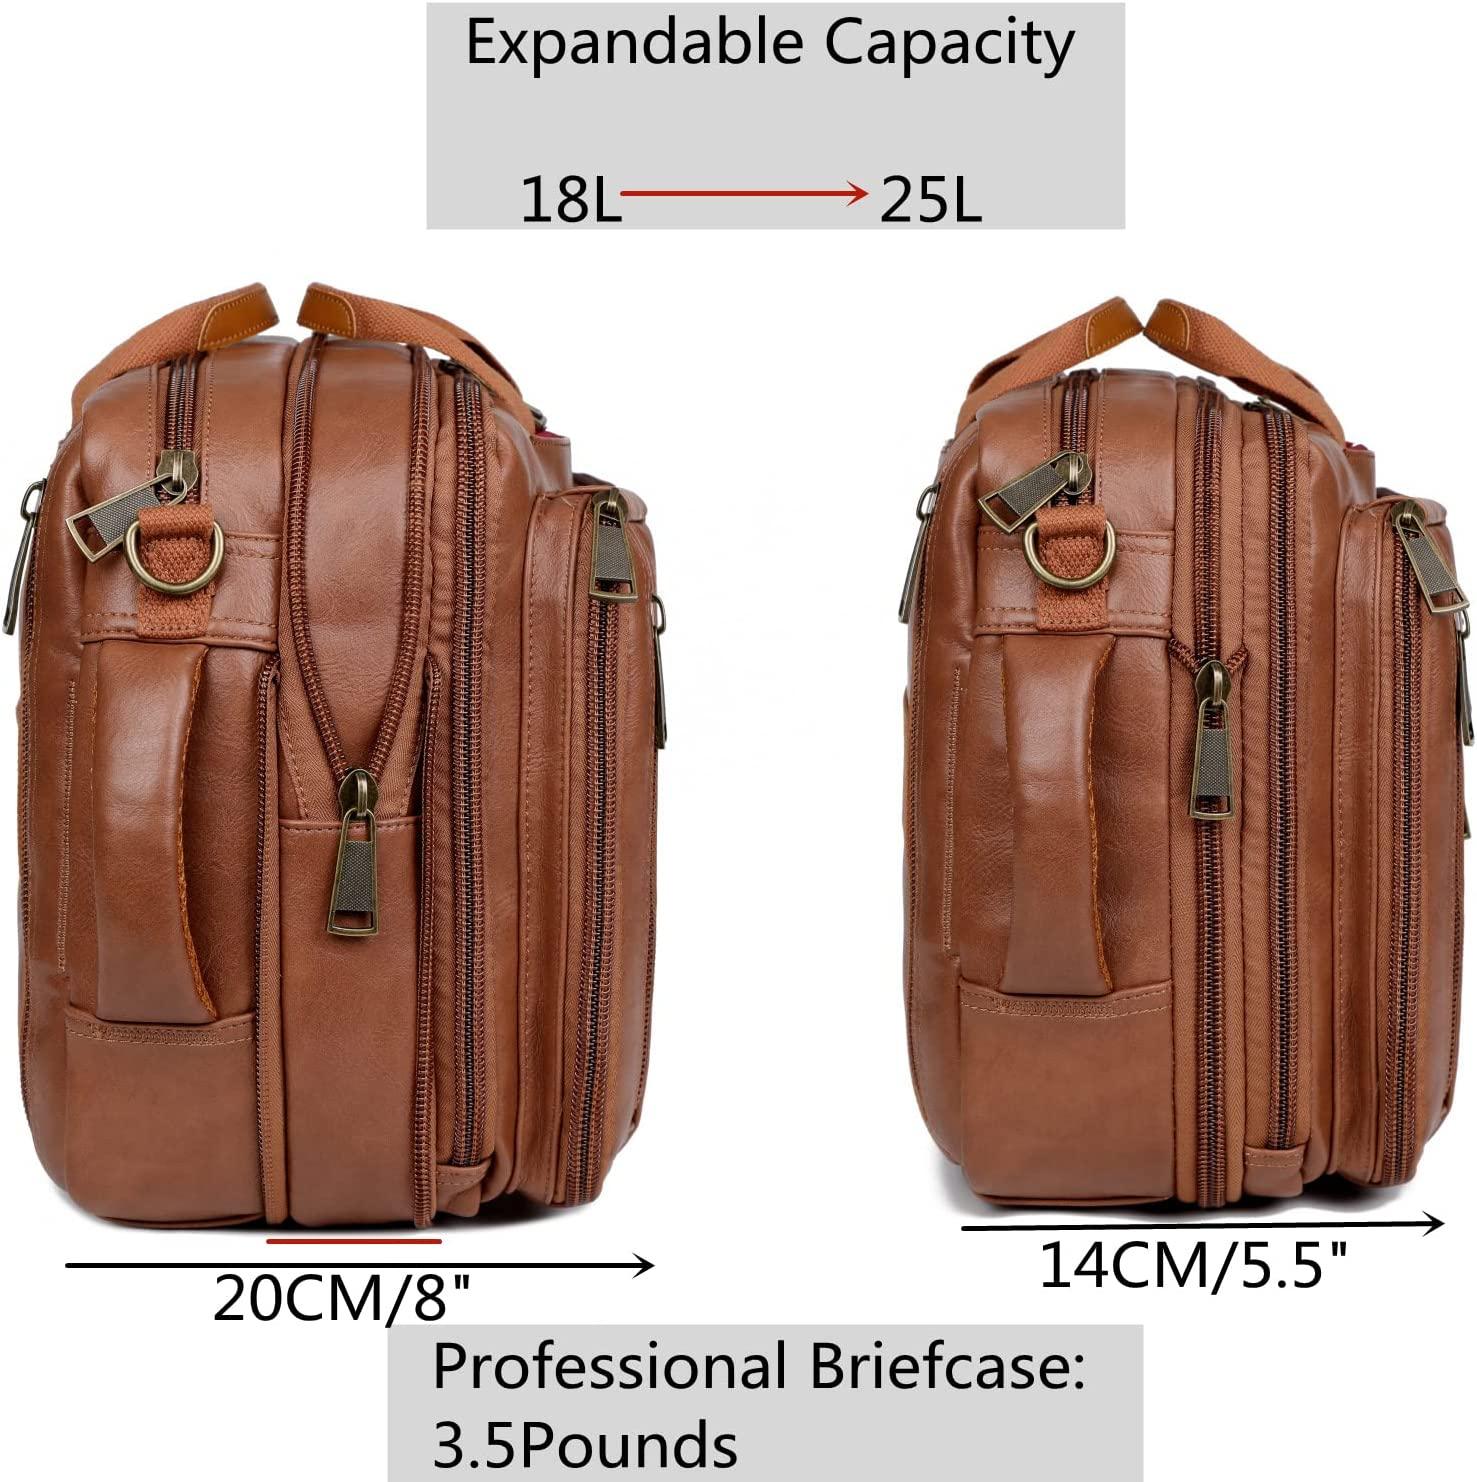 FR Fashion Co. 16" Leather Laptop Backpack Briefcase - FR Fashion Co. 